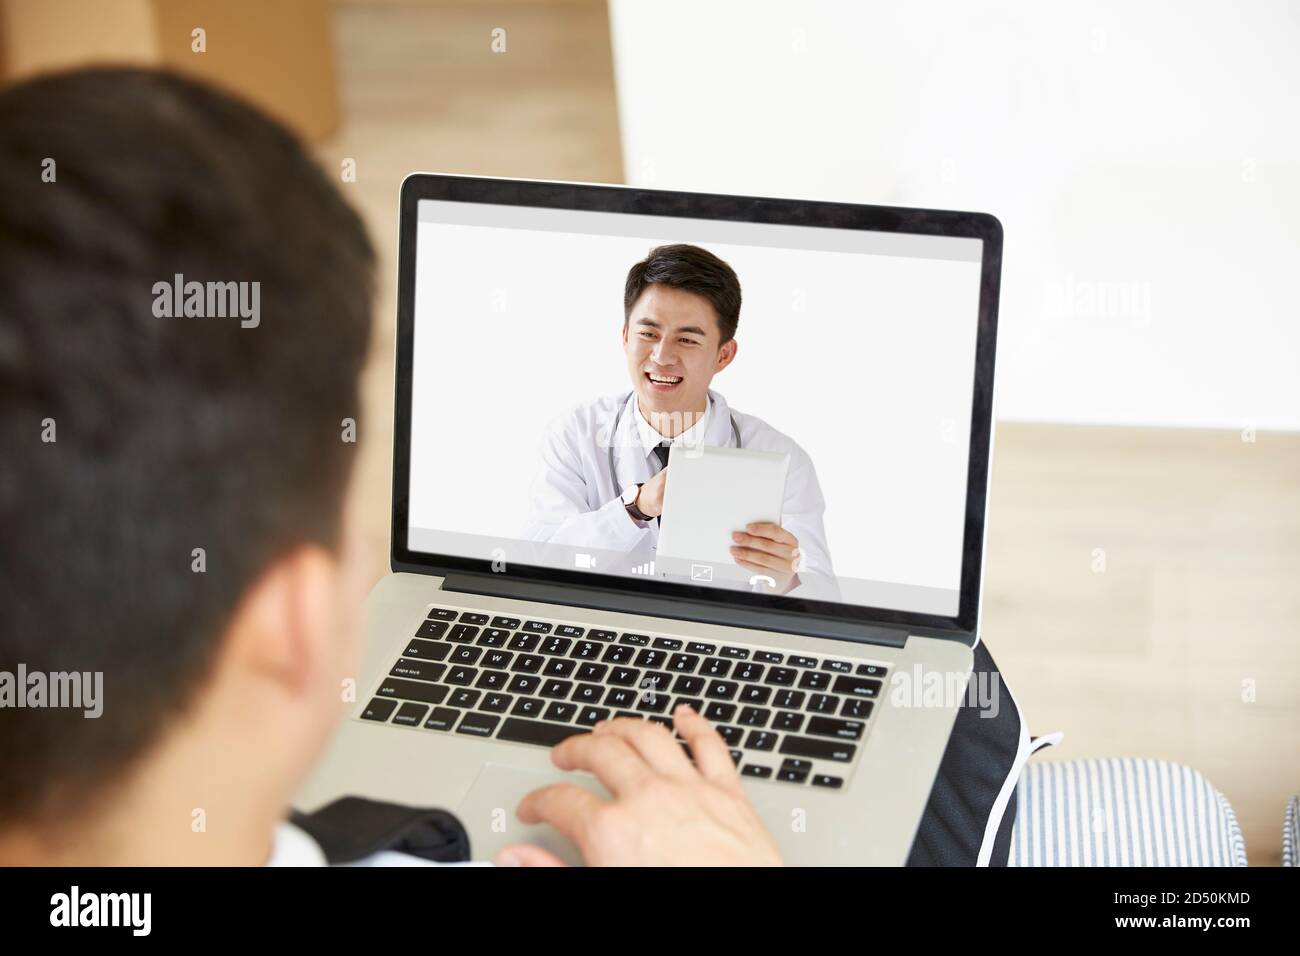 young asian man staying at home consulting primary care doctor online via video chat using laptop computer Stock Photo